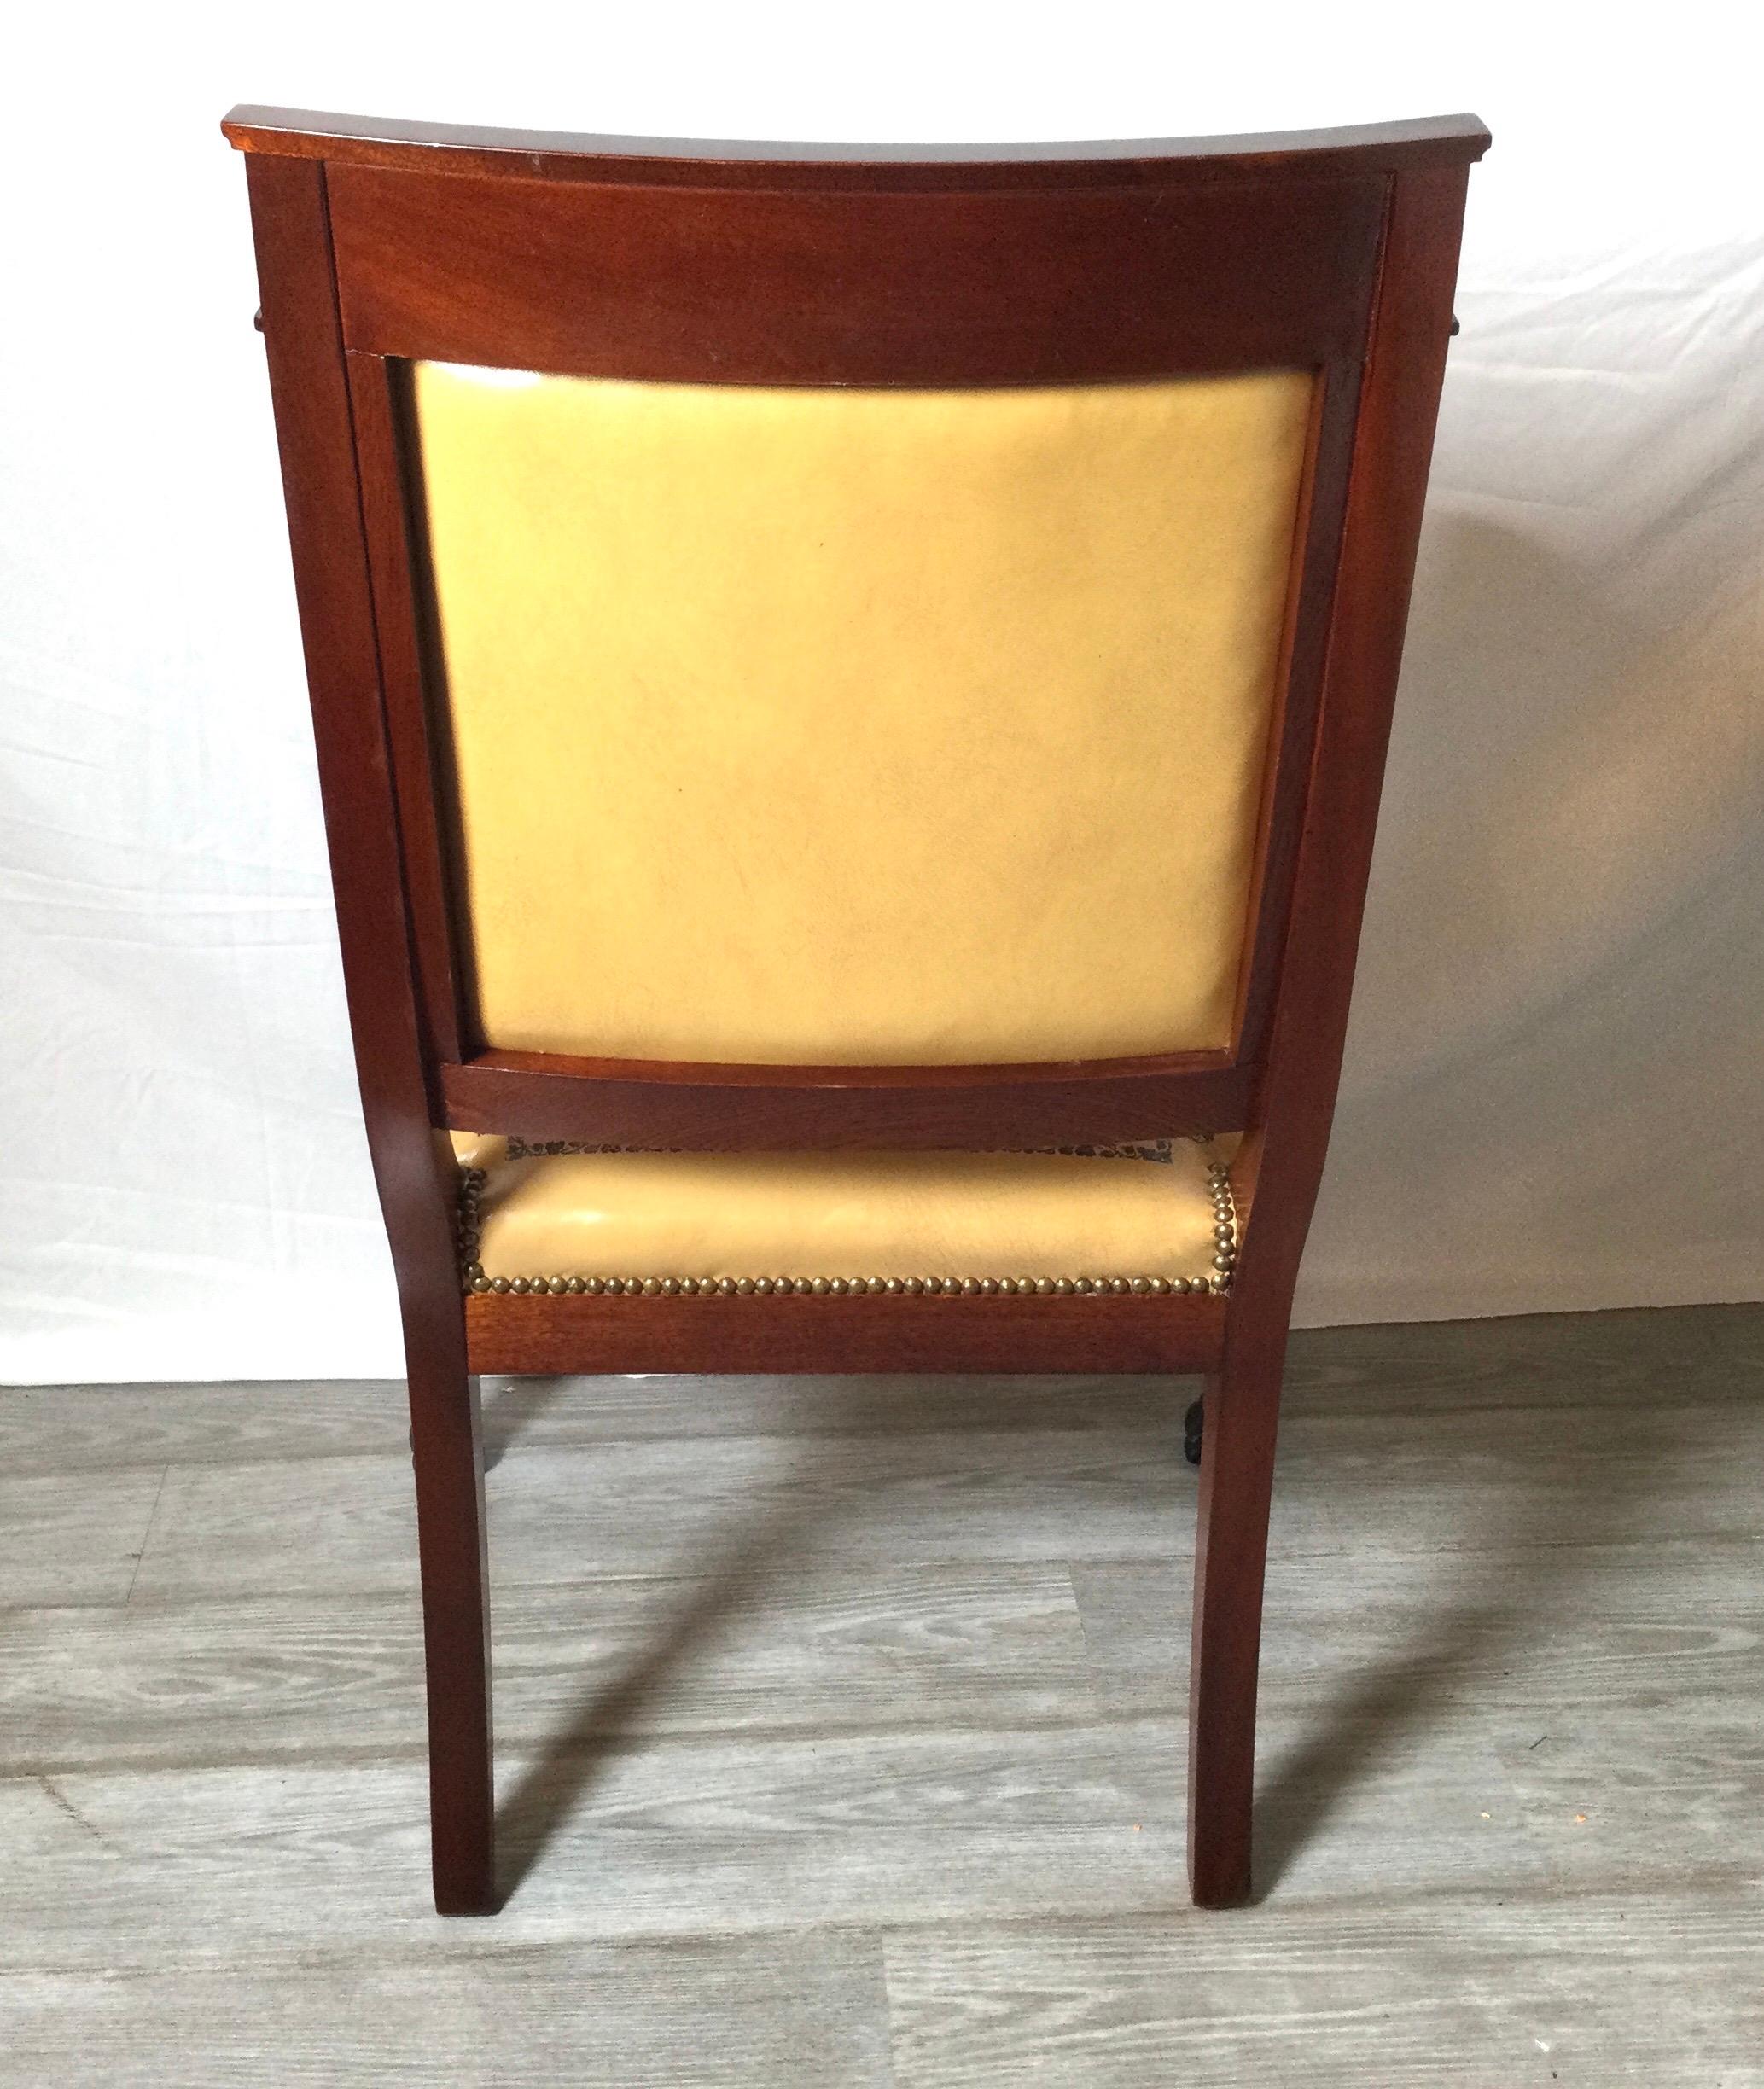 Mid-20th Century Pair of Egyptian Revival Mahogany and Leather Armchairs